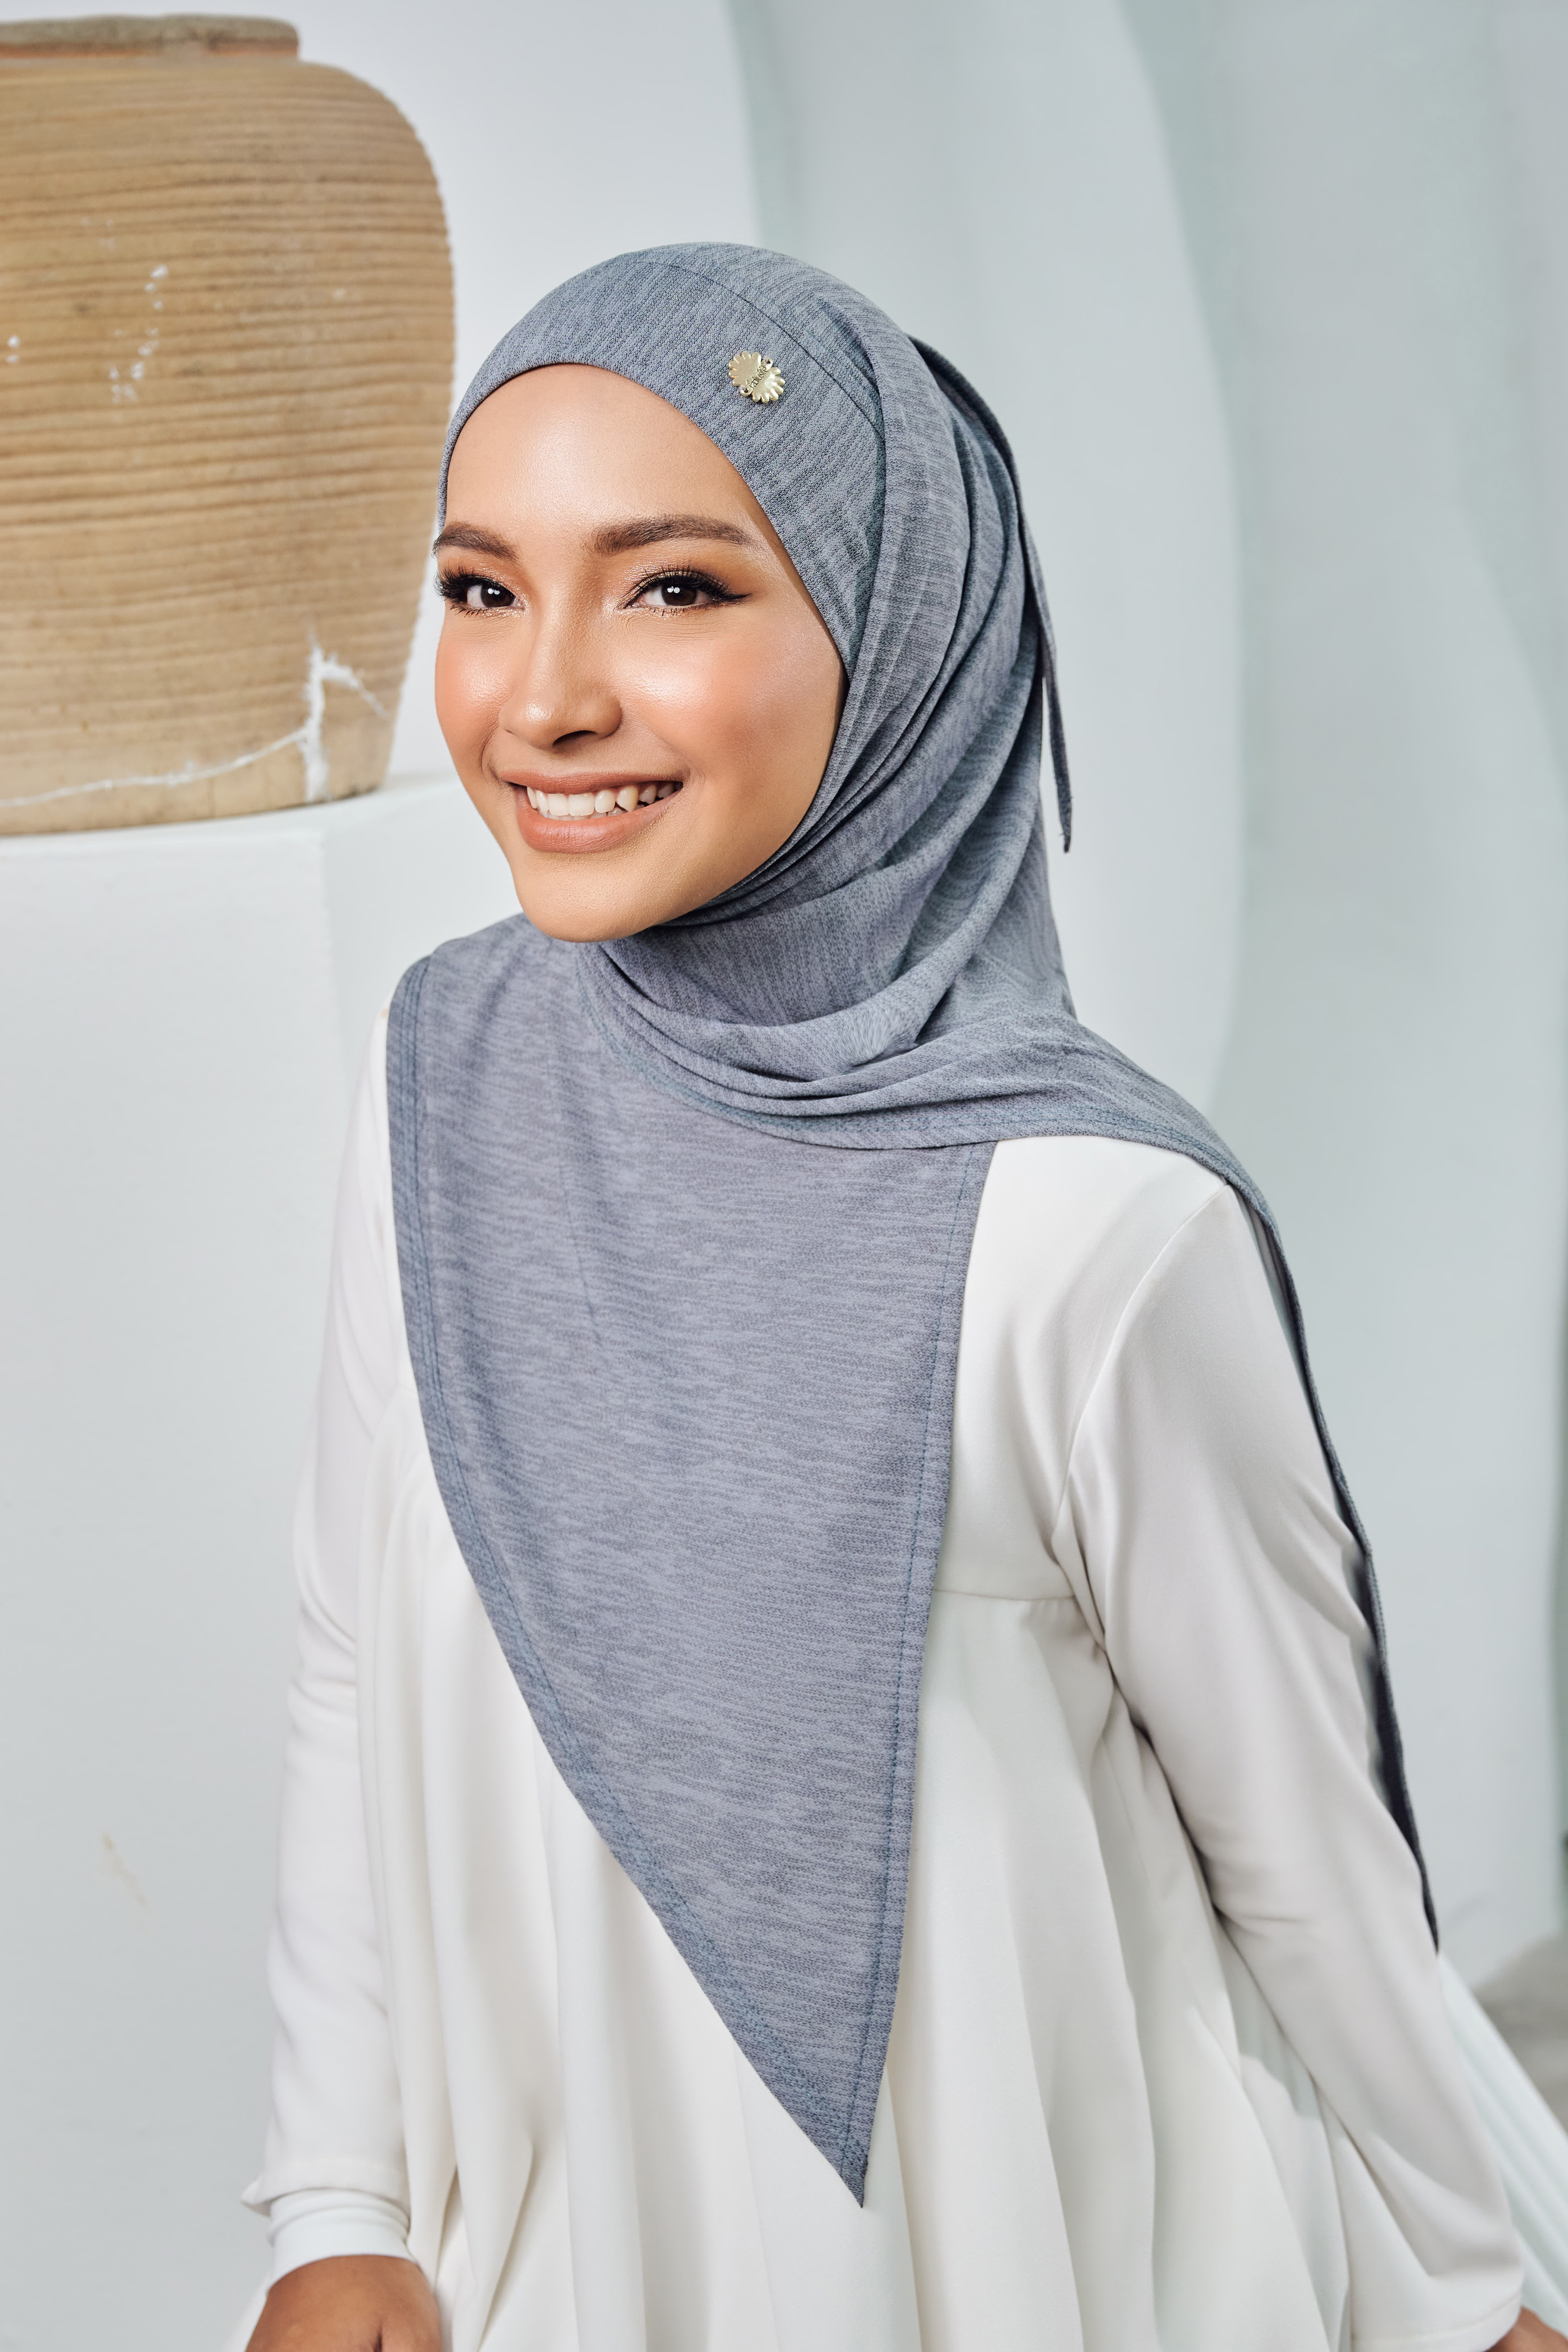 FIRA Bawal Lazy in Blue Jeans